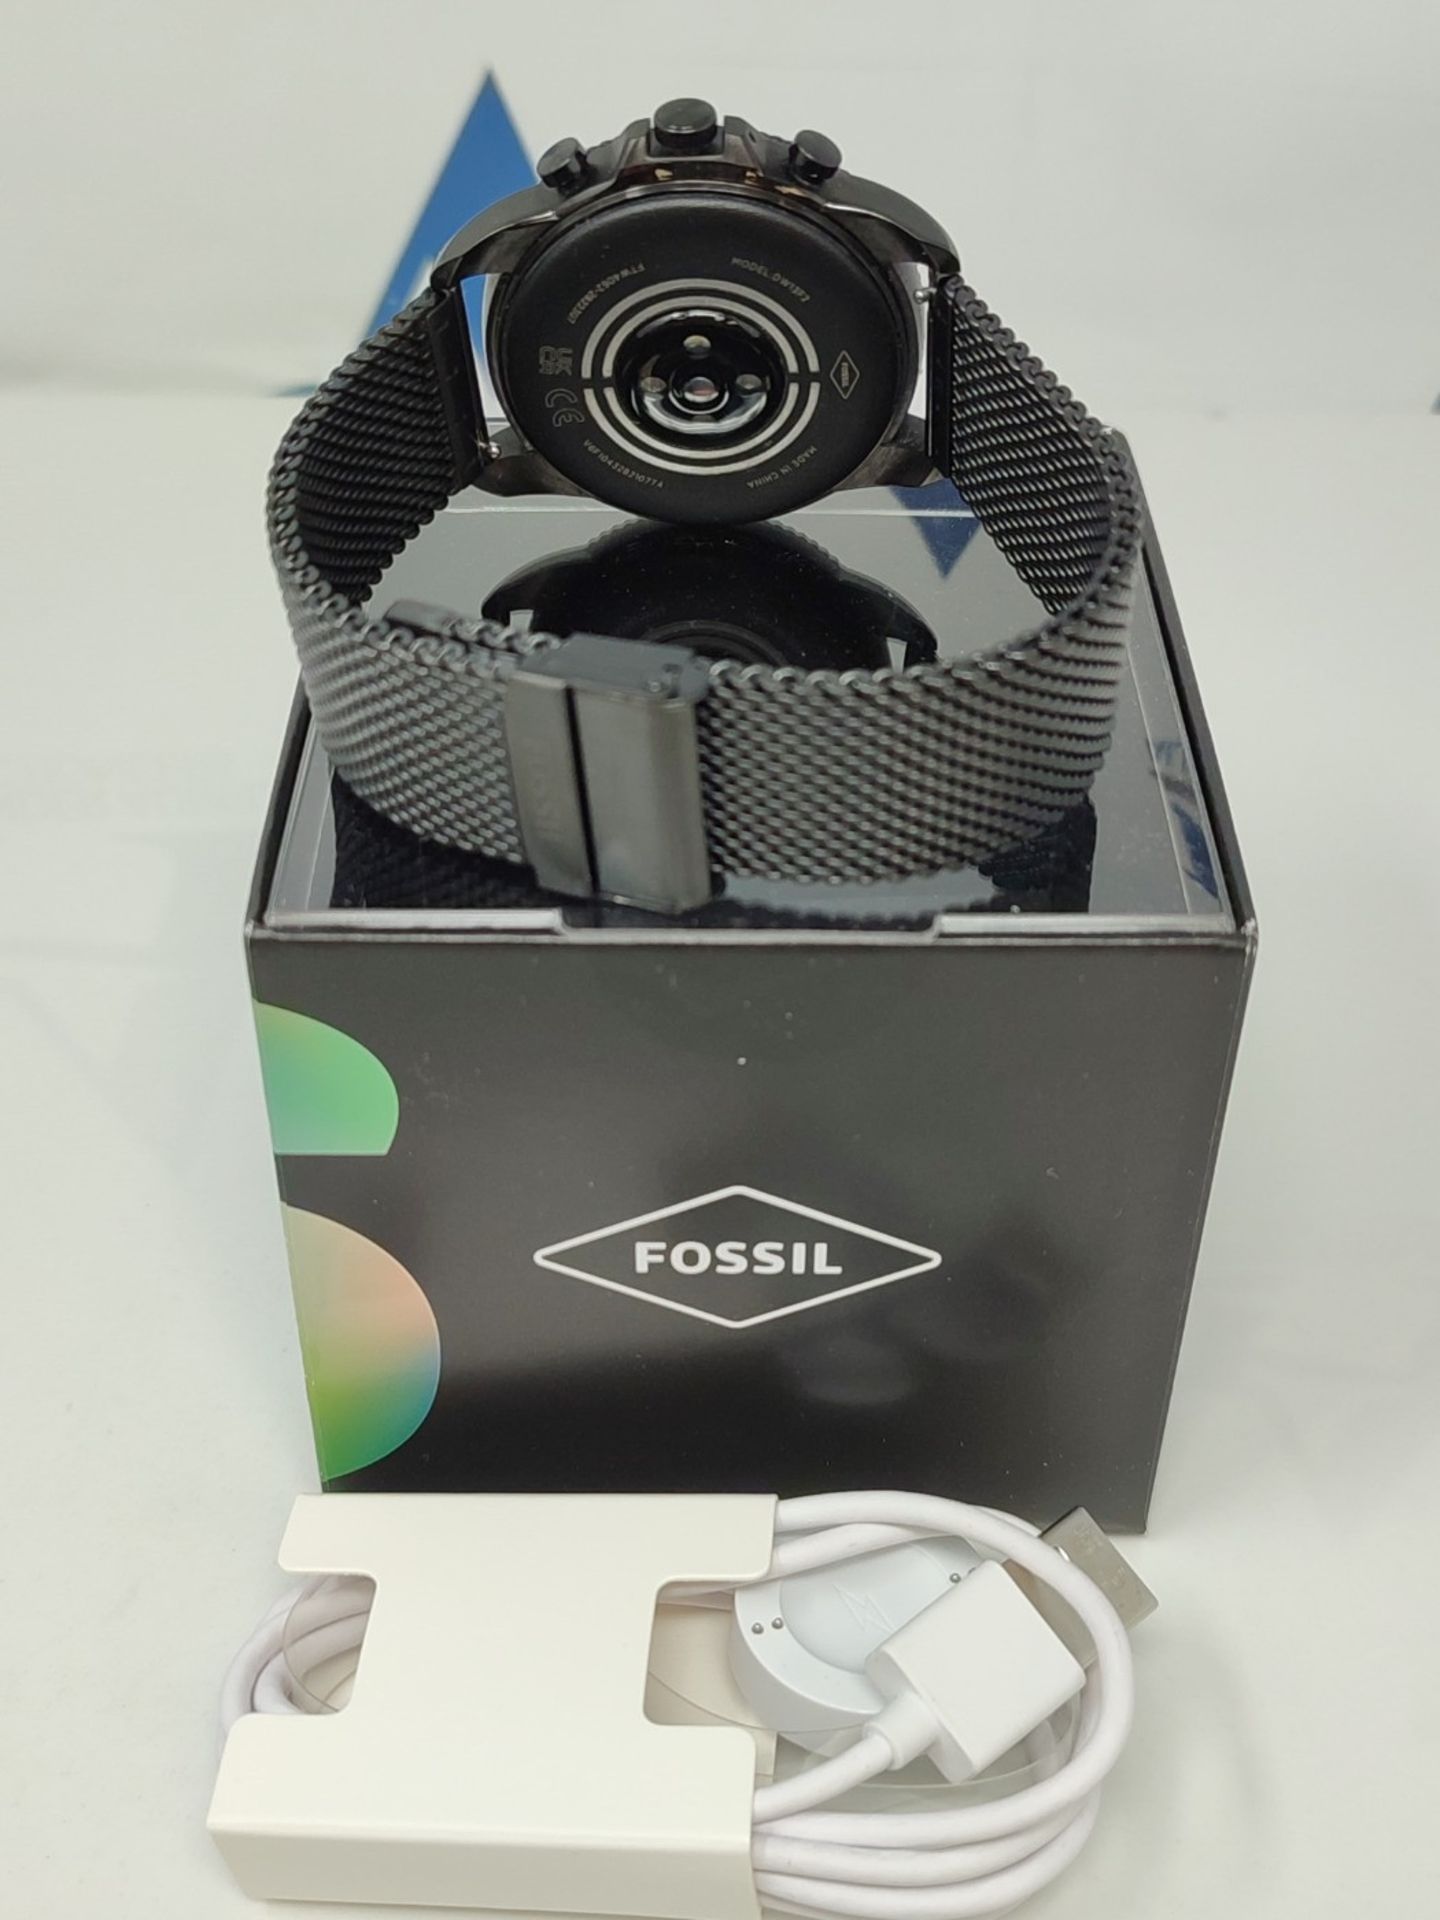 RRP £230.00 Fossil Men's Gen 6 smartwatch with speaker, heart rate, NFC, and smartphone alerts $FT - Image 3 of 6